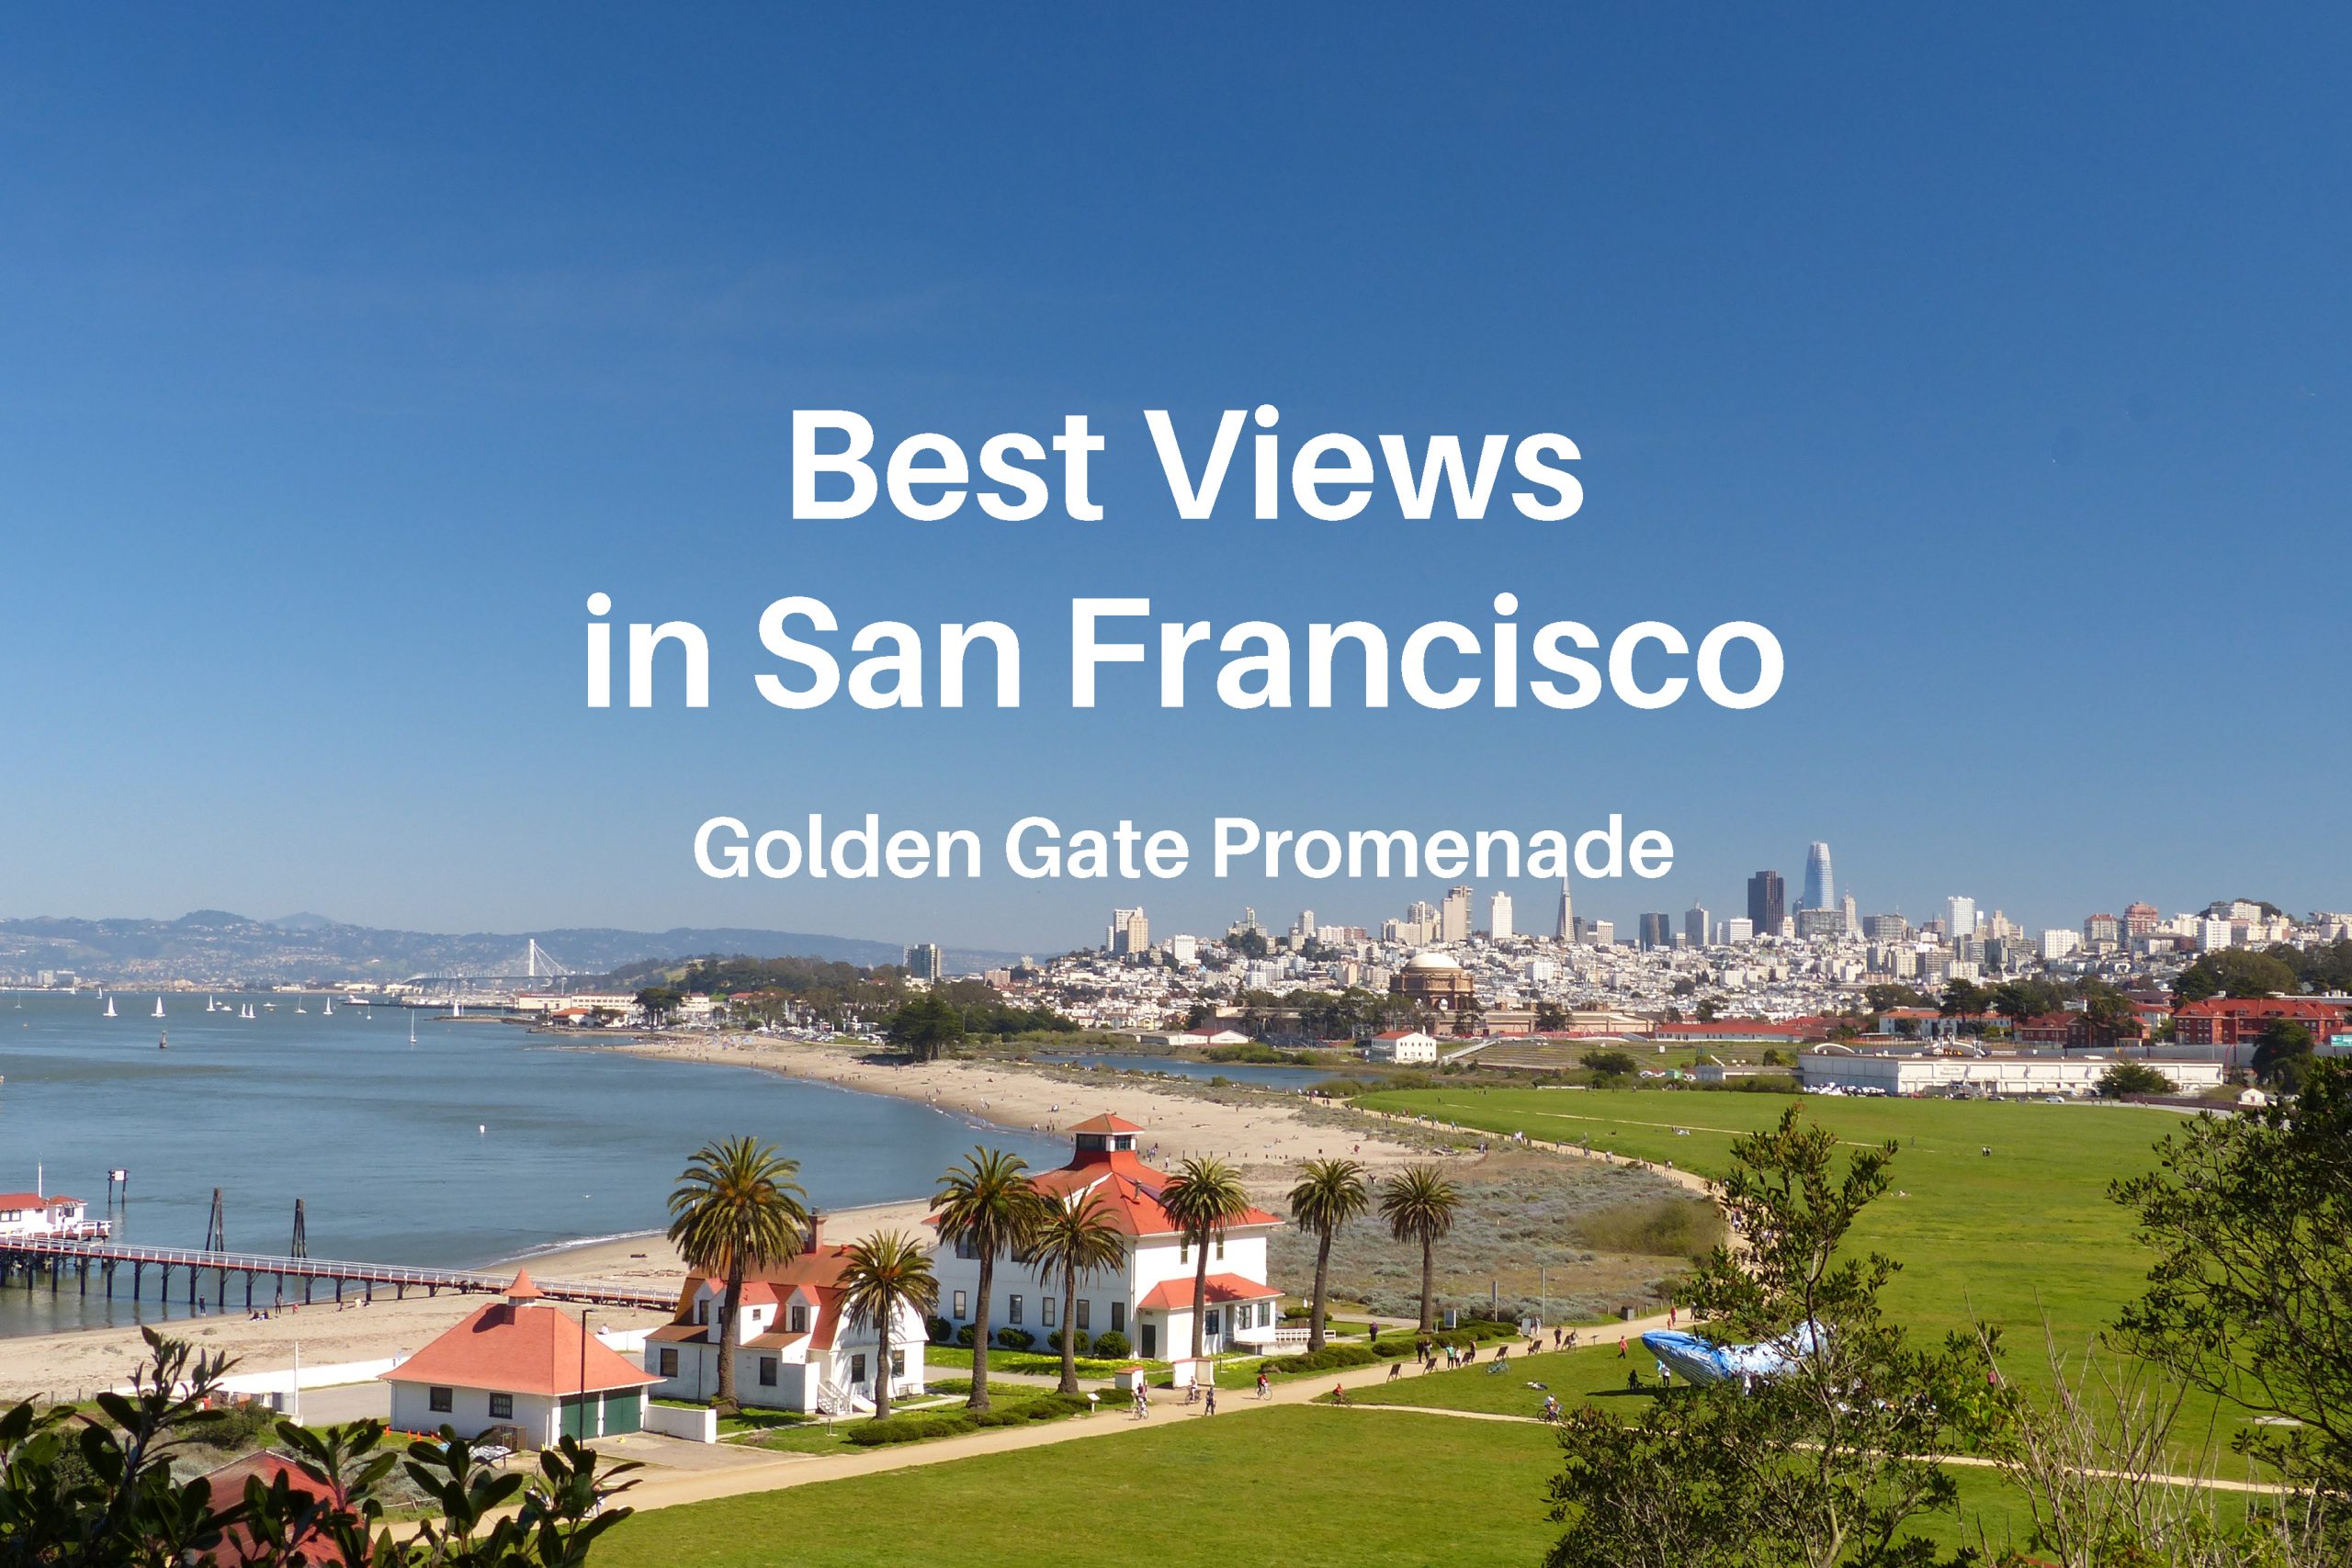 Crissy Field and the Golden Gate Promenade with the best views in San Francisco.